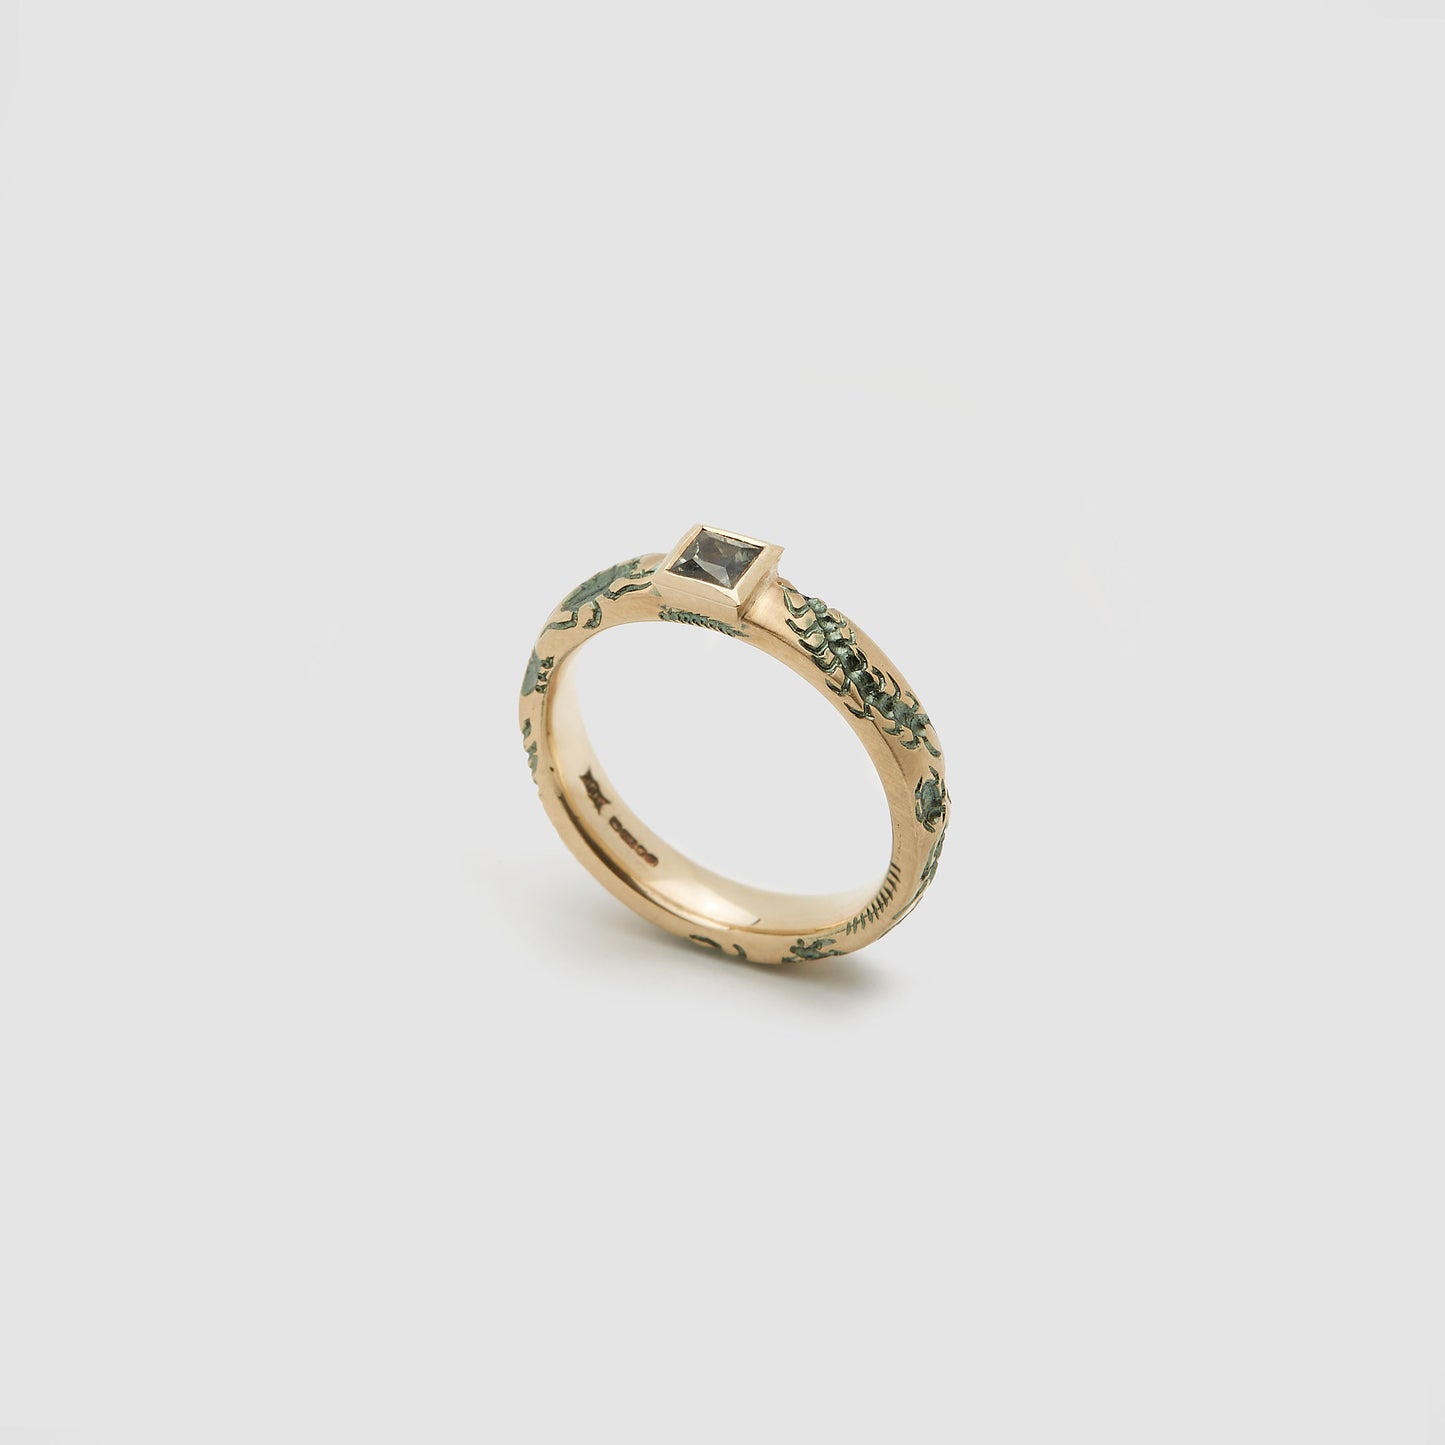 Castro Smith Jewelry Gold Undergrowth Ring with a Square Cut Sapphire and Slate Green Engravings.